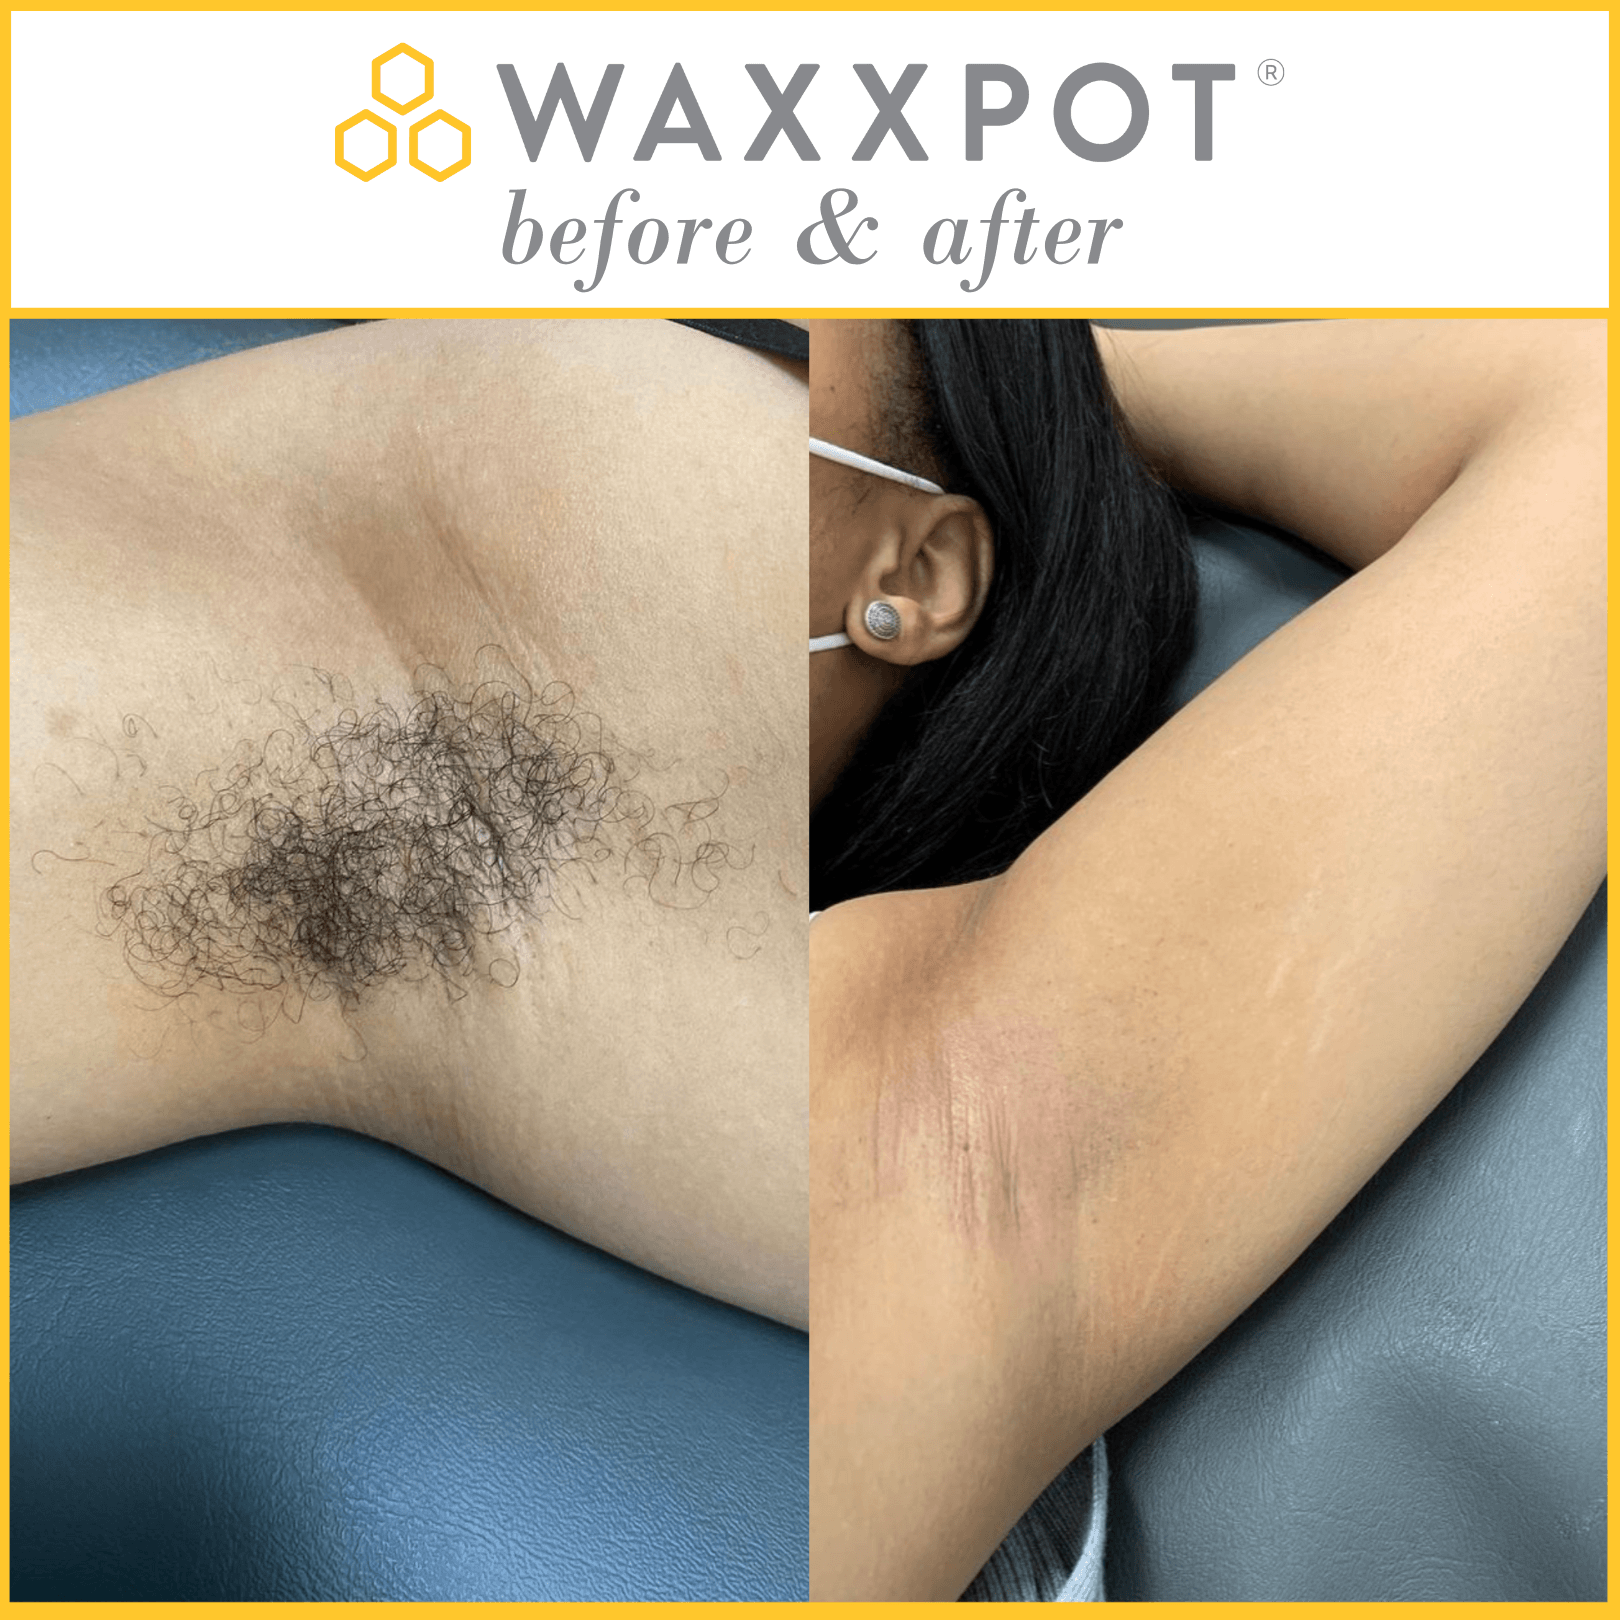 Waxxpot Underarm Wax before and after